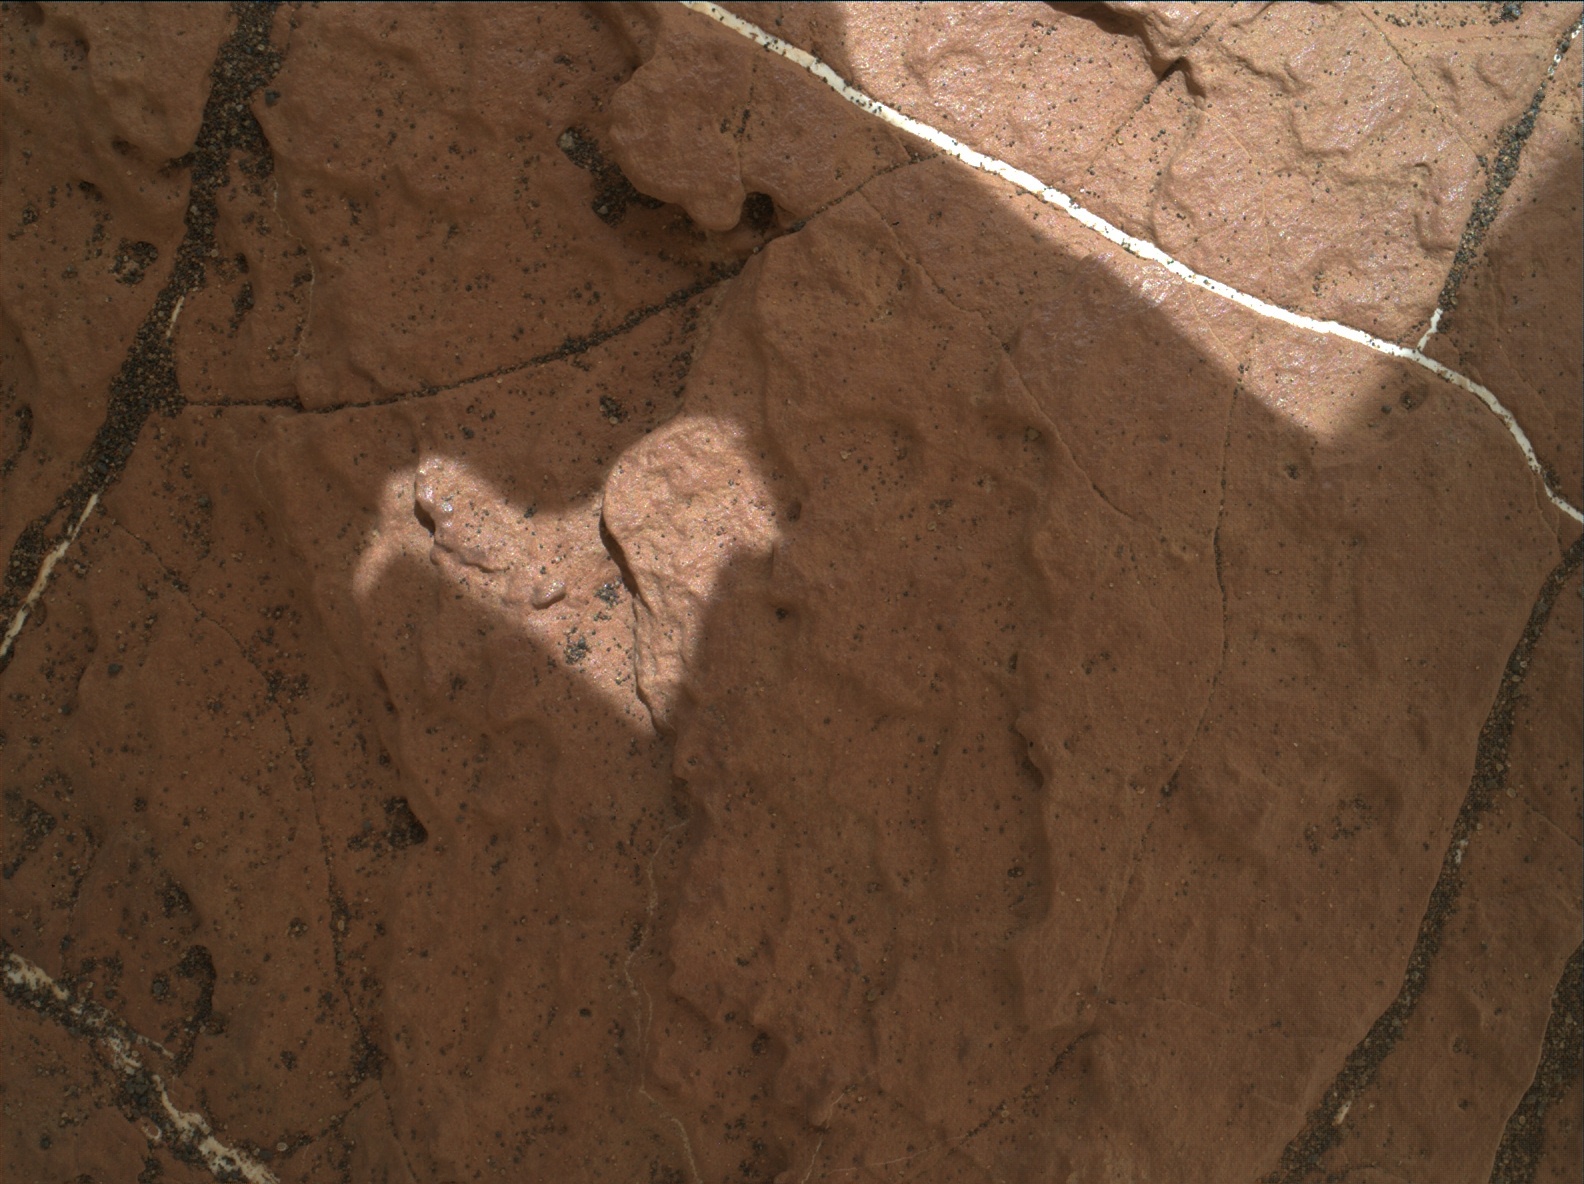 Nasa's Mars rover Curiosity acquired this image using its Mars Hand Lens Imager (MAHLI) on Sol 1596